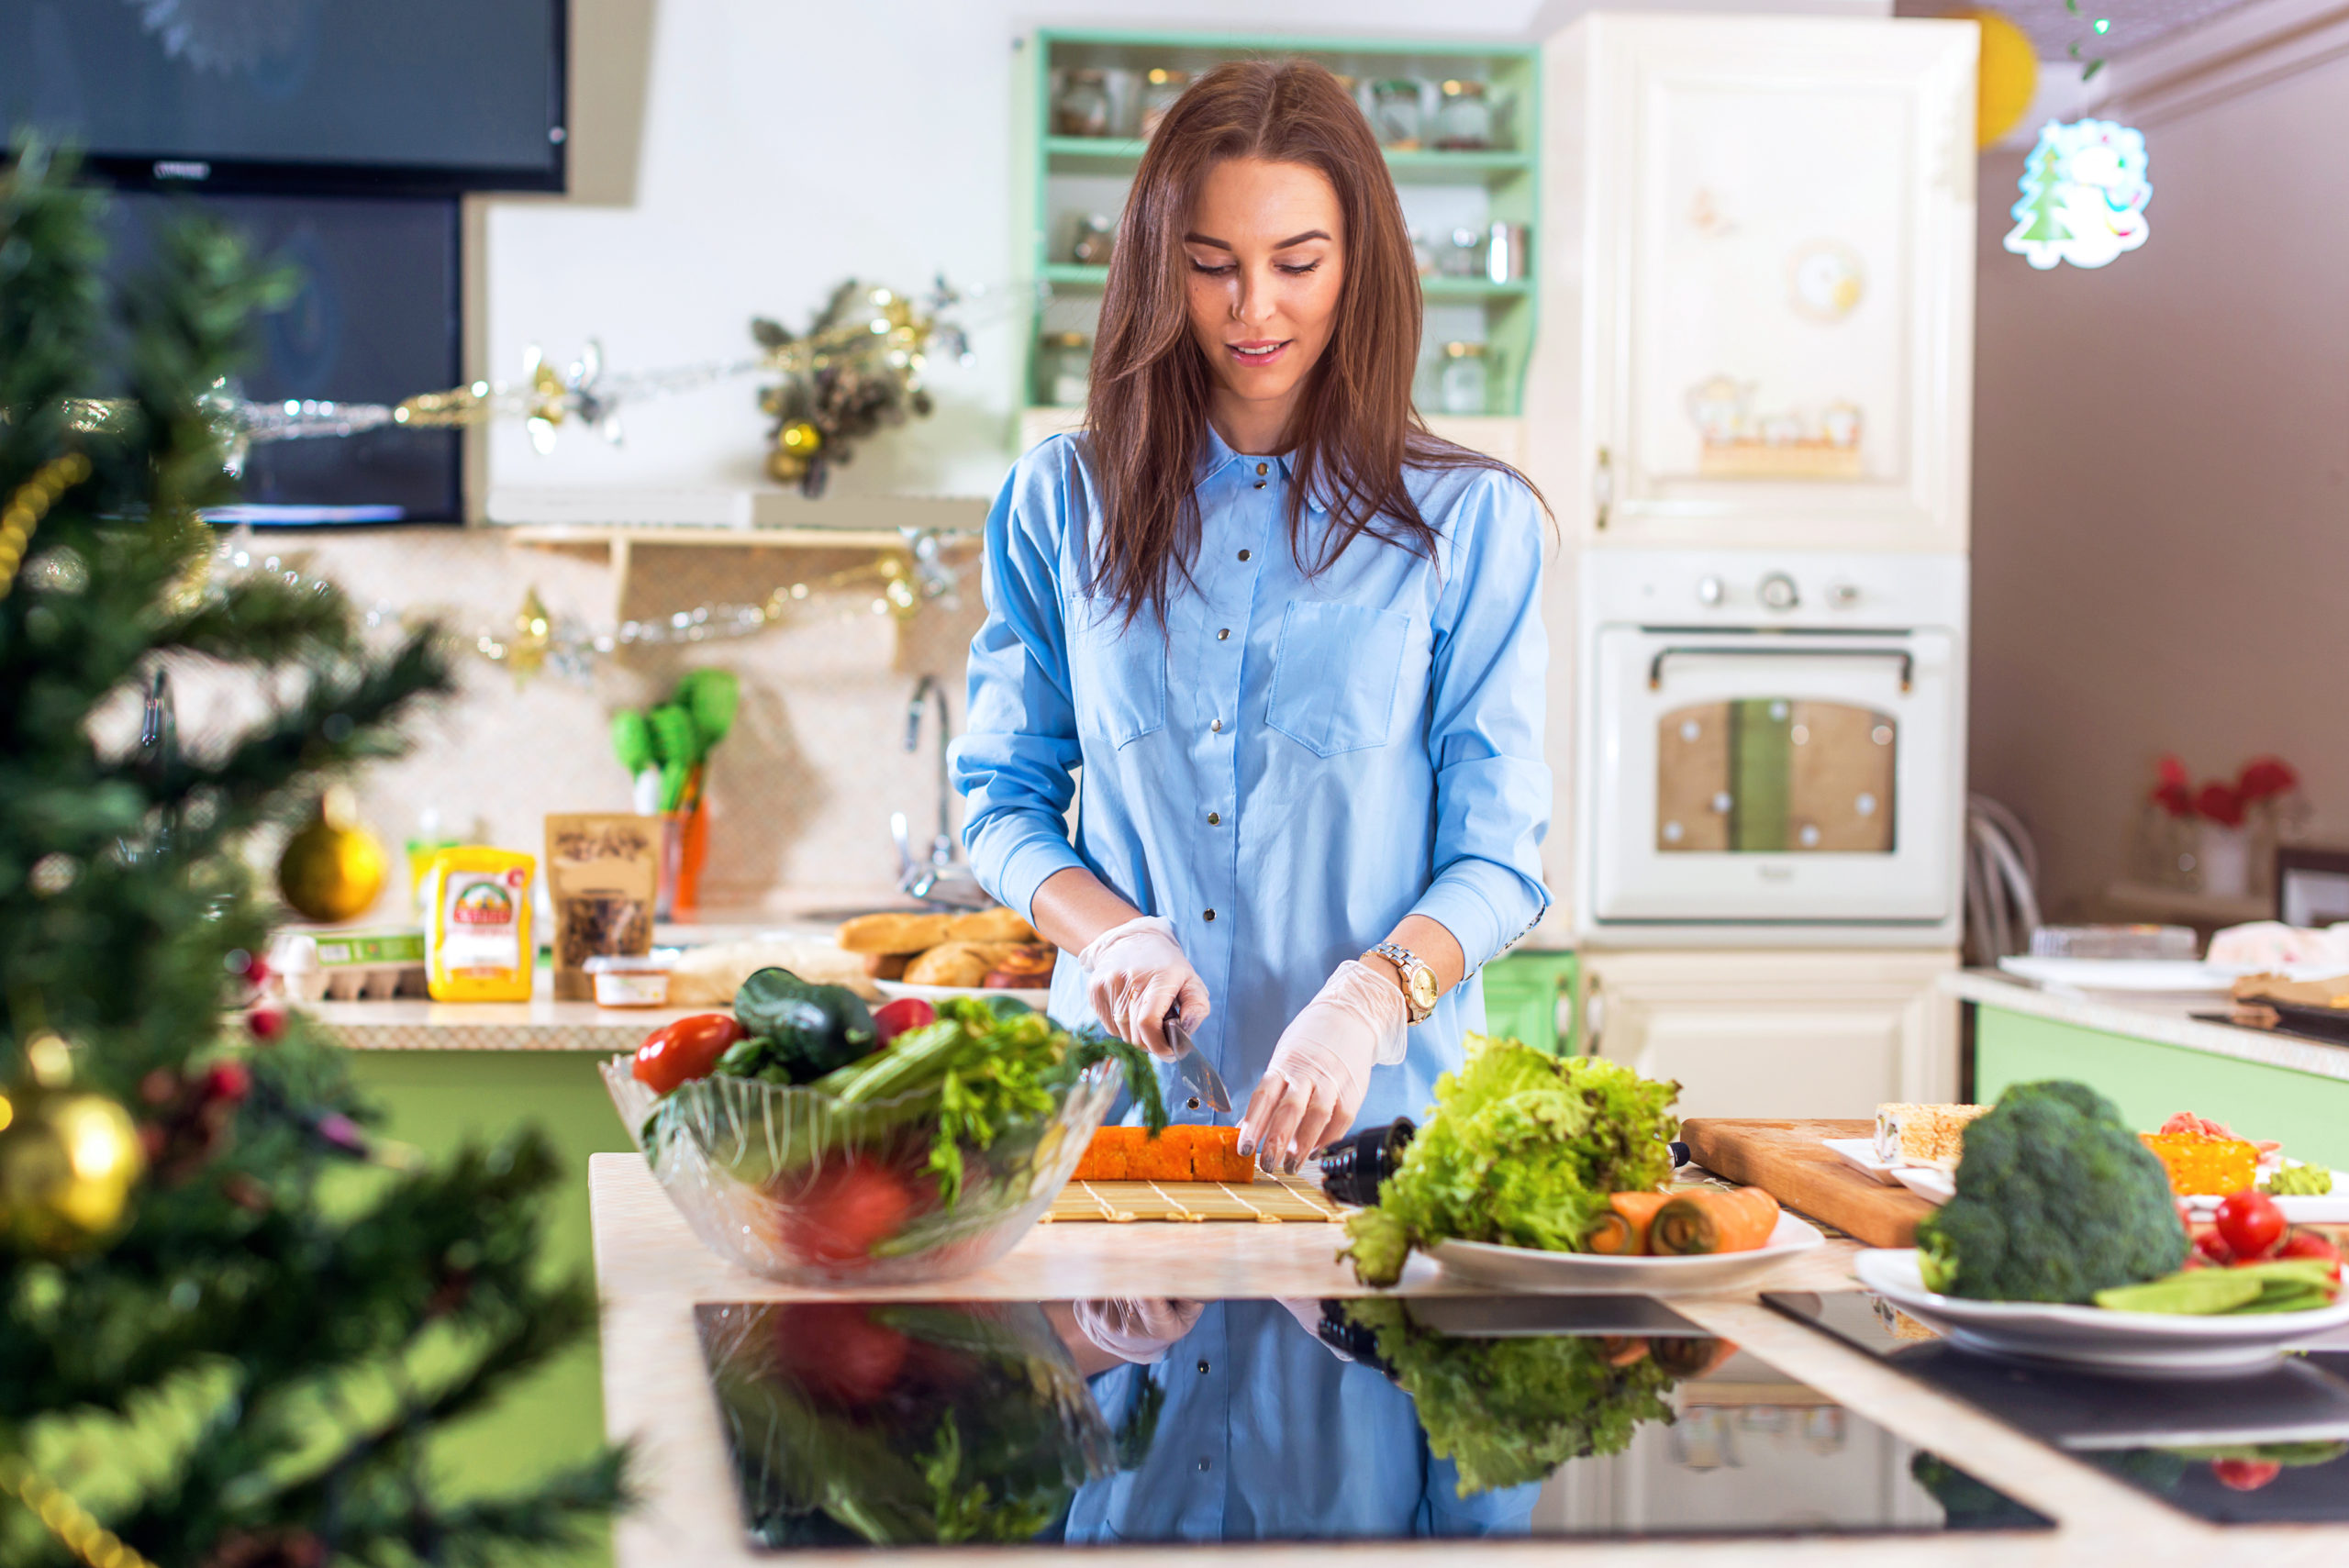 Female wearing blue button down chopping vegetables in the kitchen